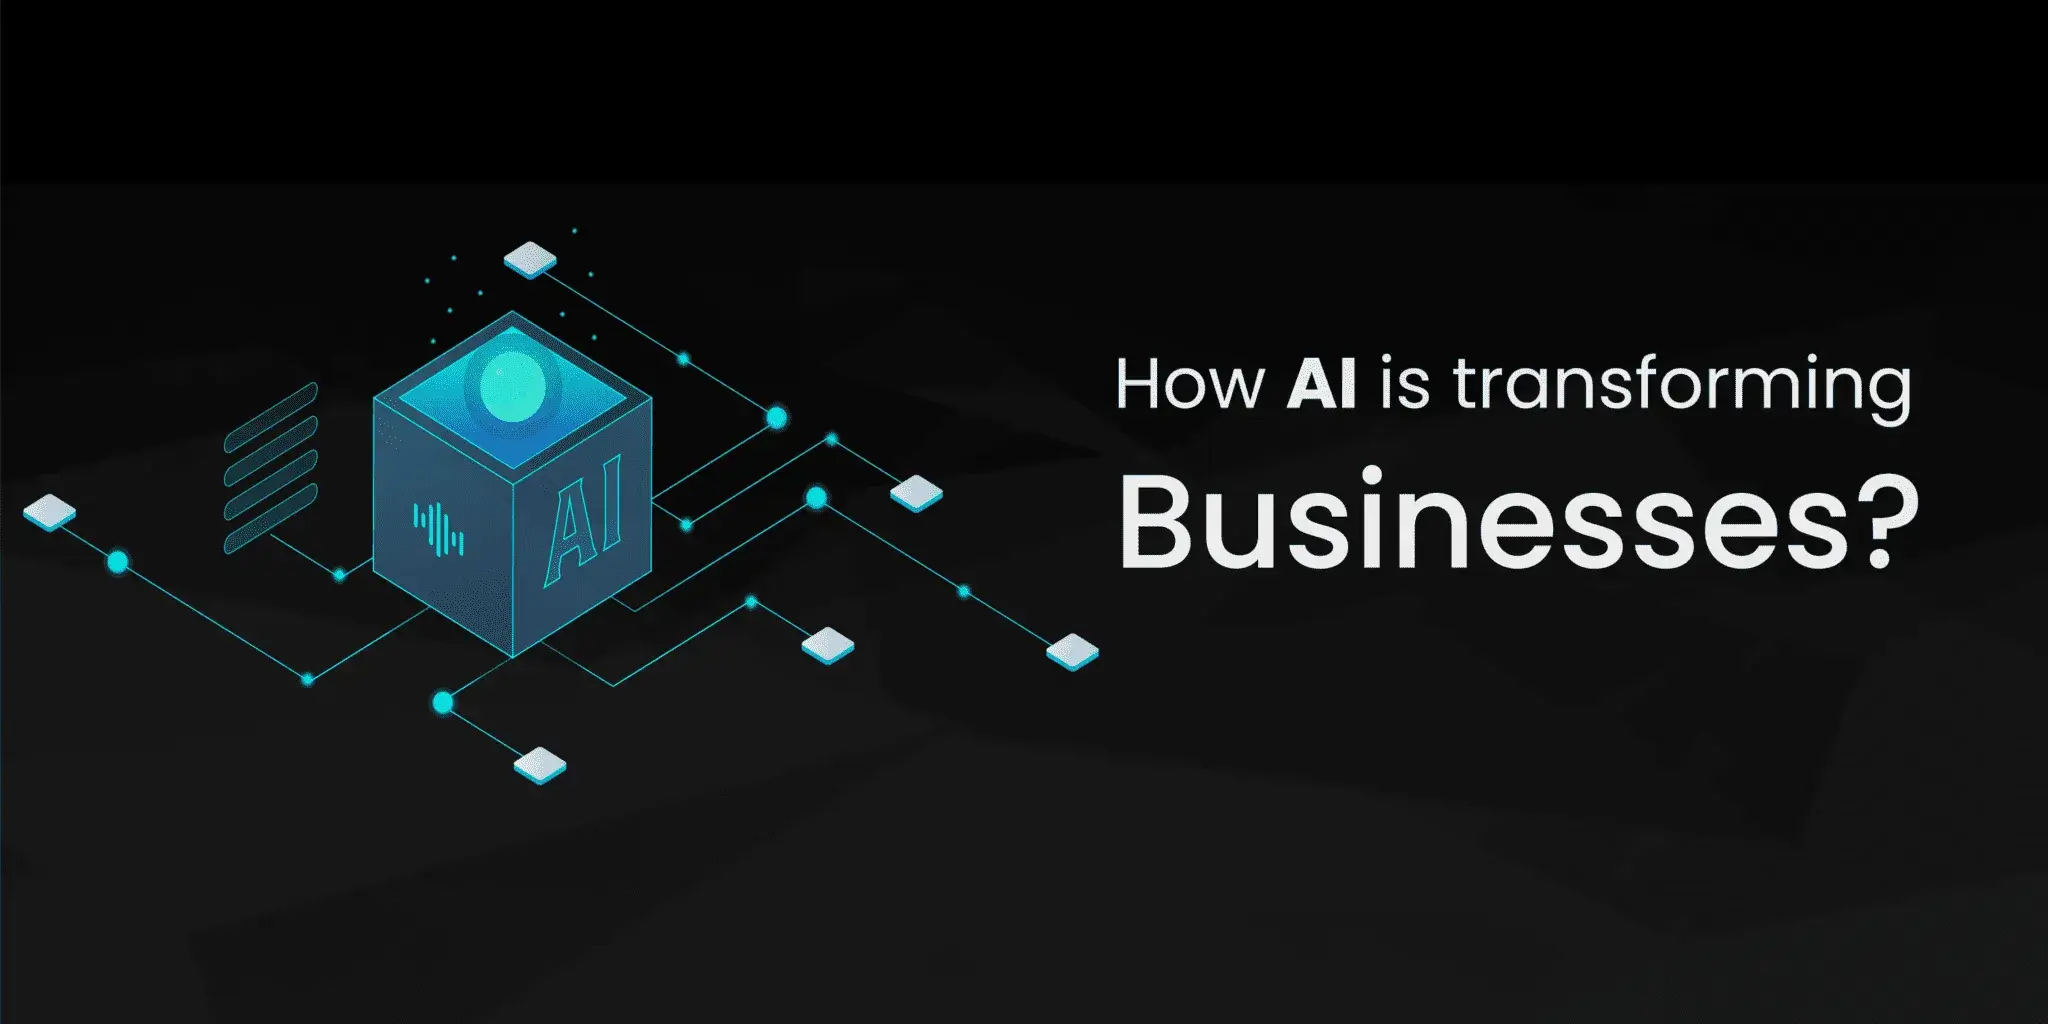 How AI is transforming businesses?